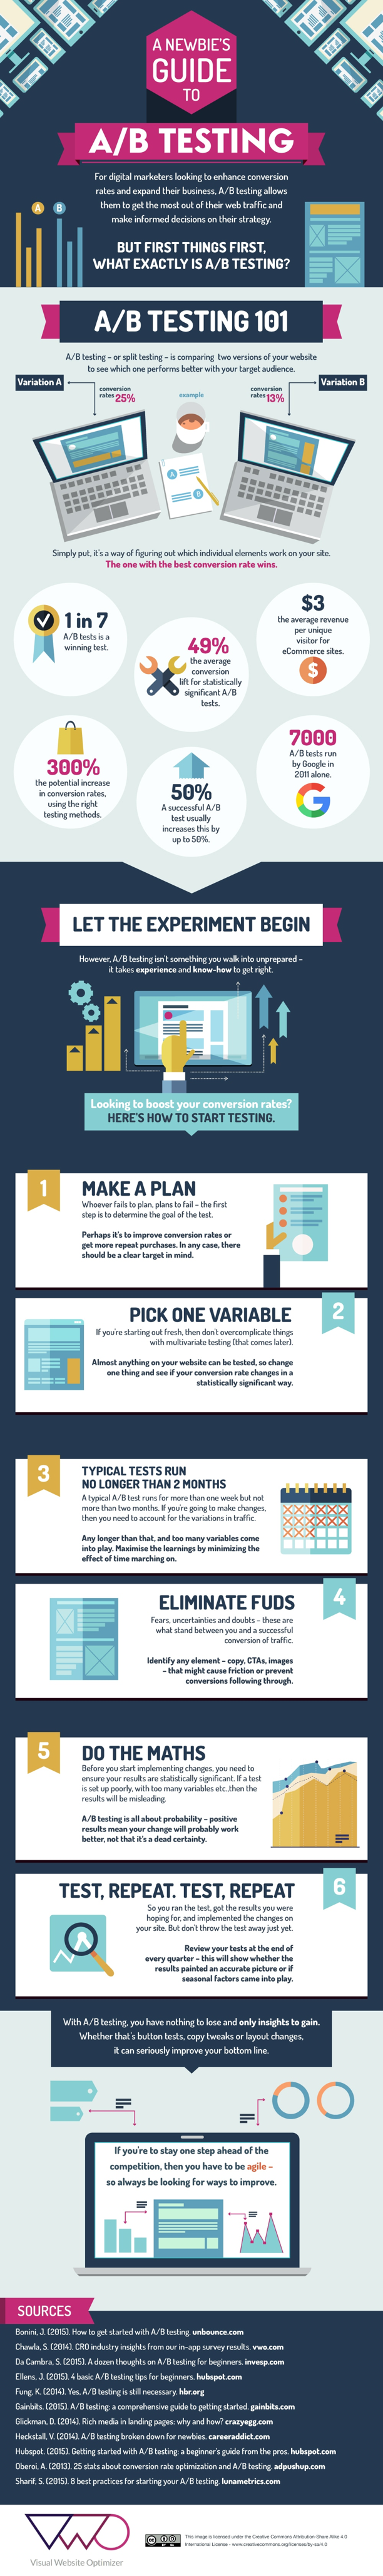 A Newbie’s Guide to A/B Testing